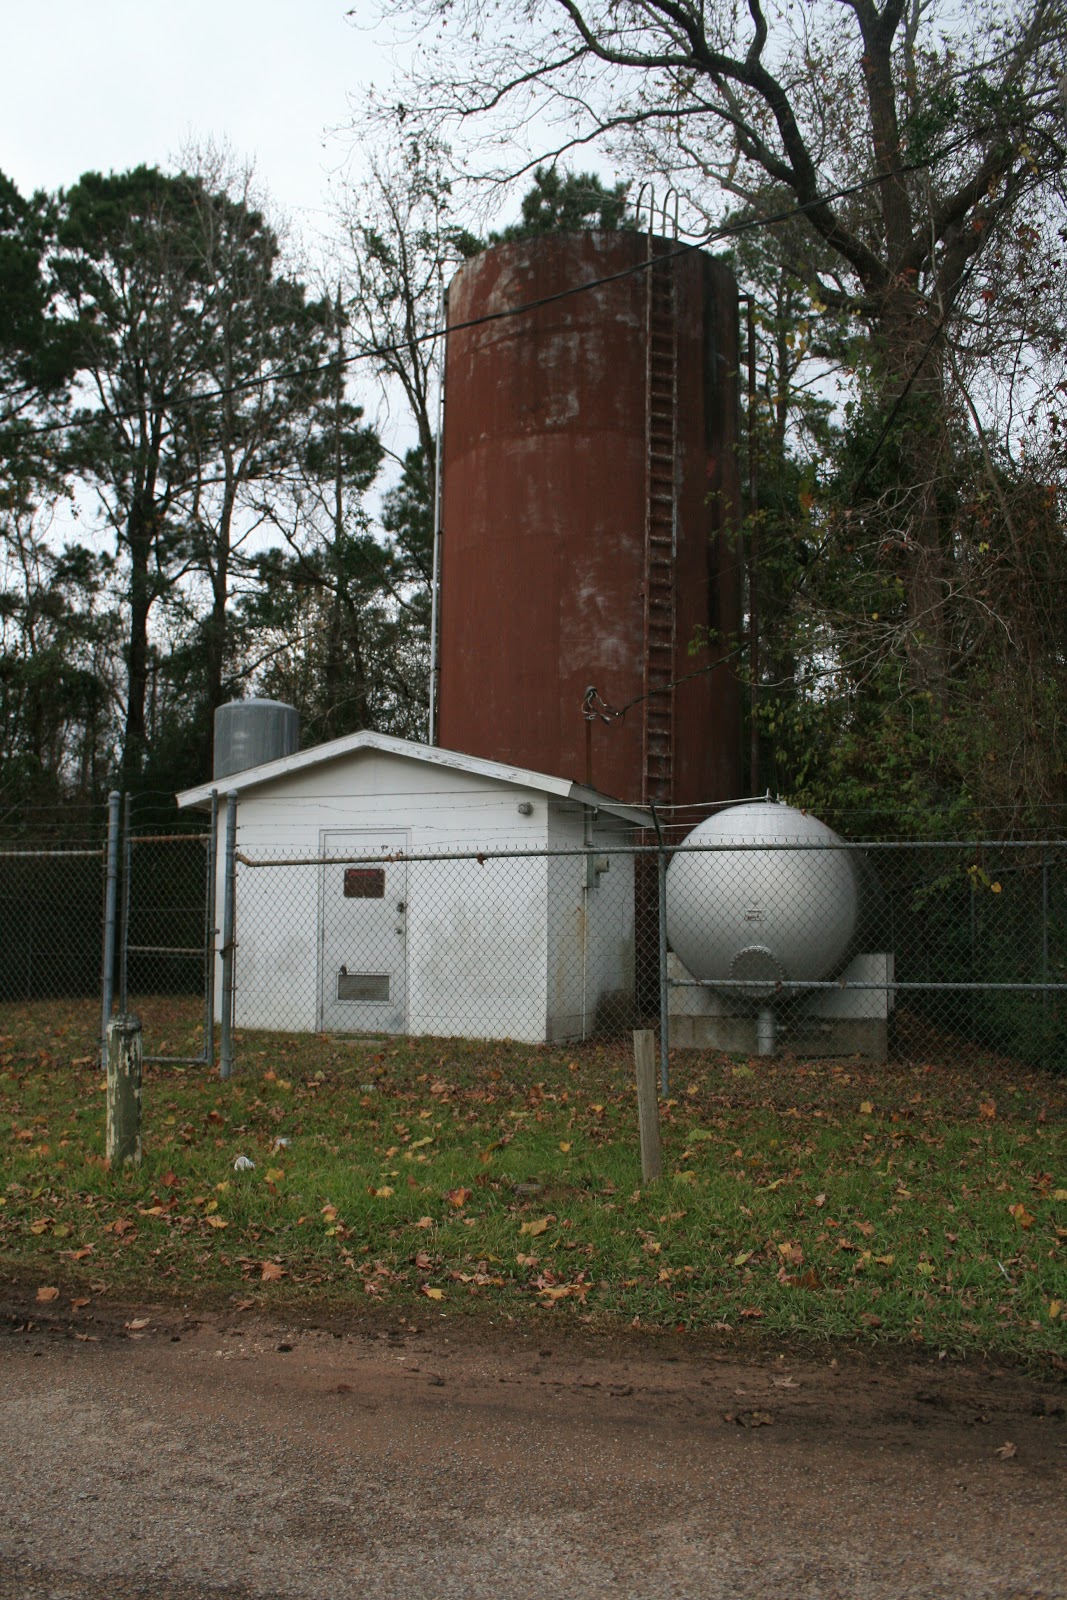 A small white pitched-roof building is shown in front of a red water tower.